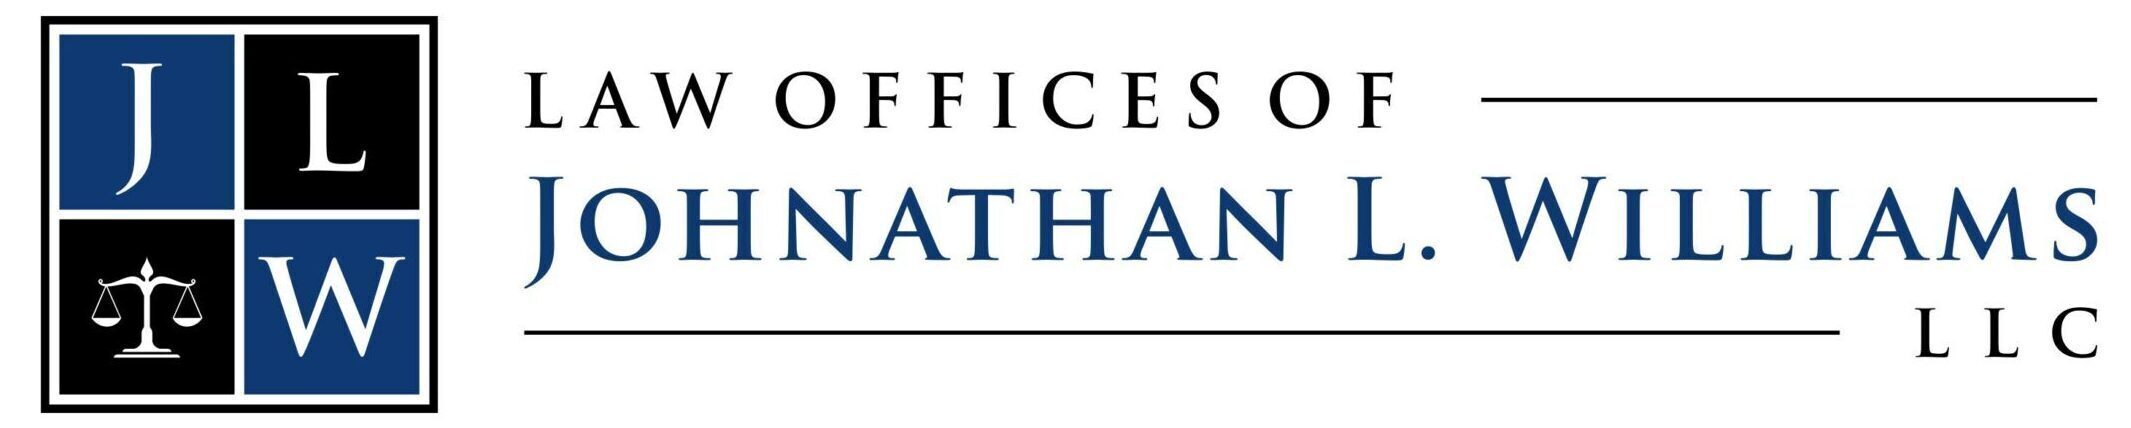 Law Offices of Johnathan L. Williams